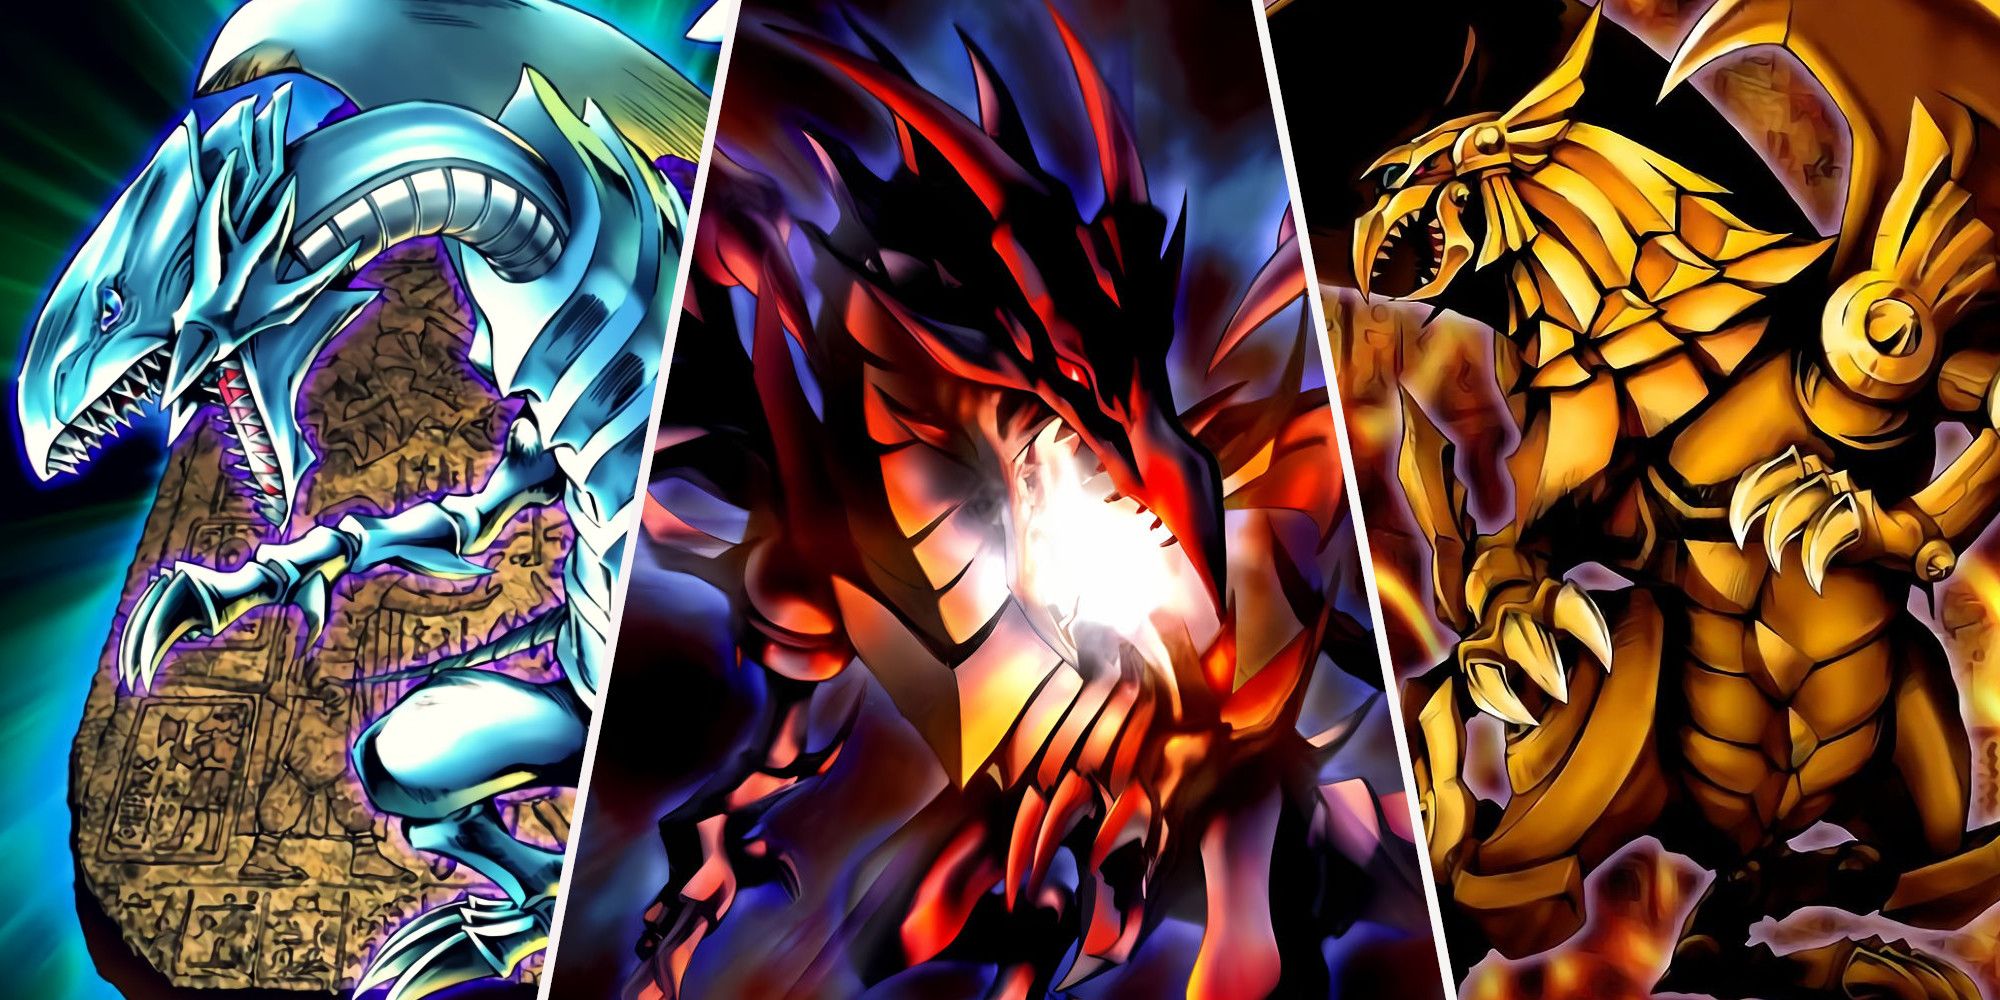 Blue Eyes White Dragon, Red Eyes Black Dragon, And Winged Dragon of Ra from left to right.